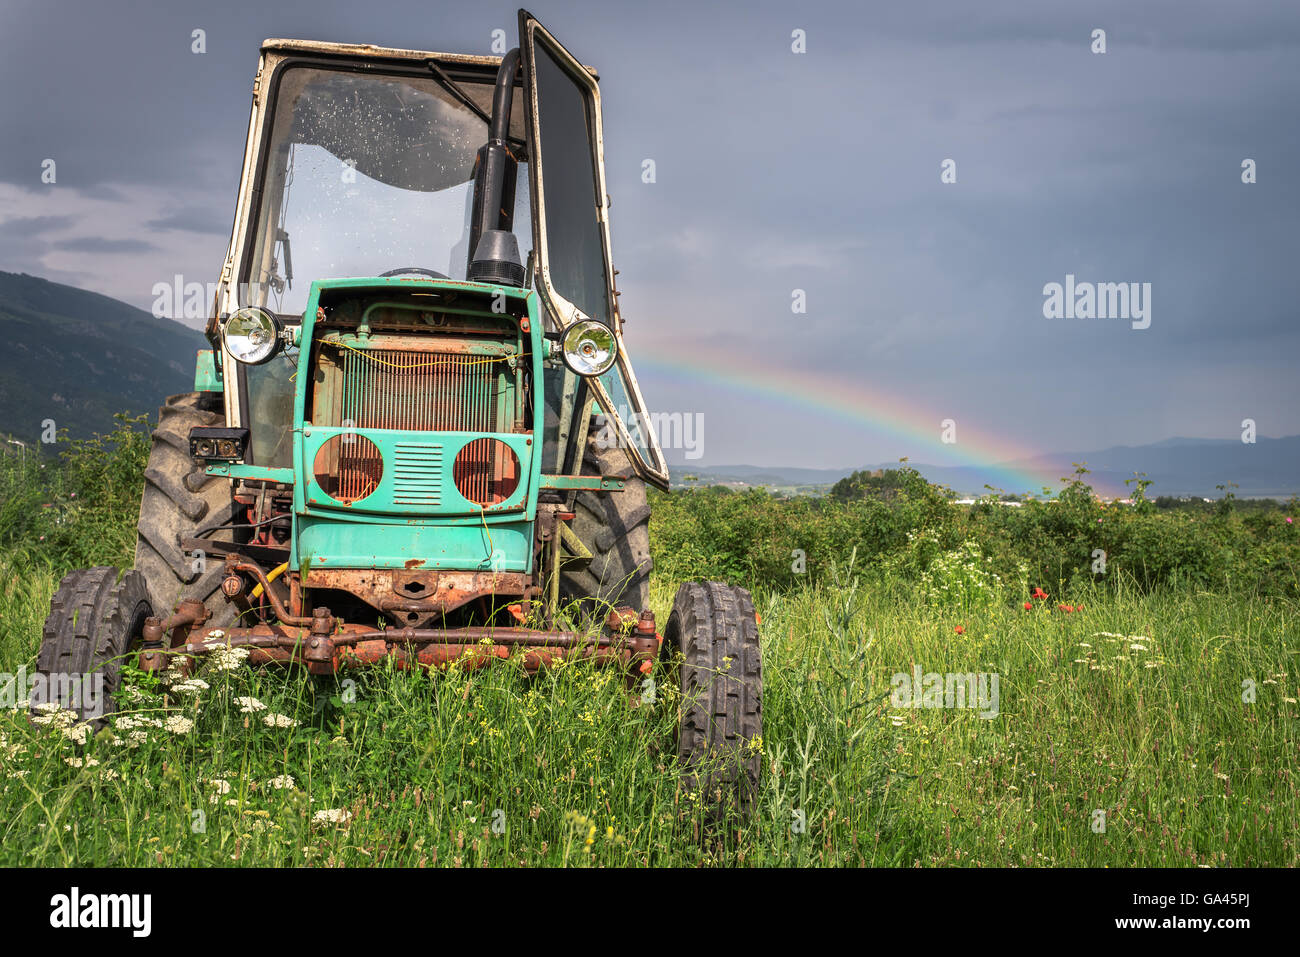 old tractor on the grass field Stock Photo